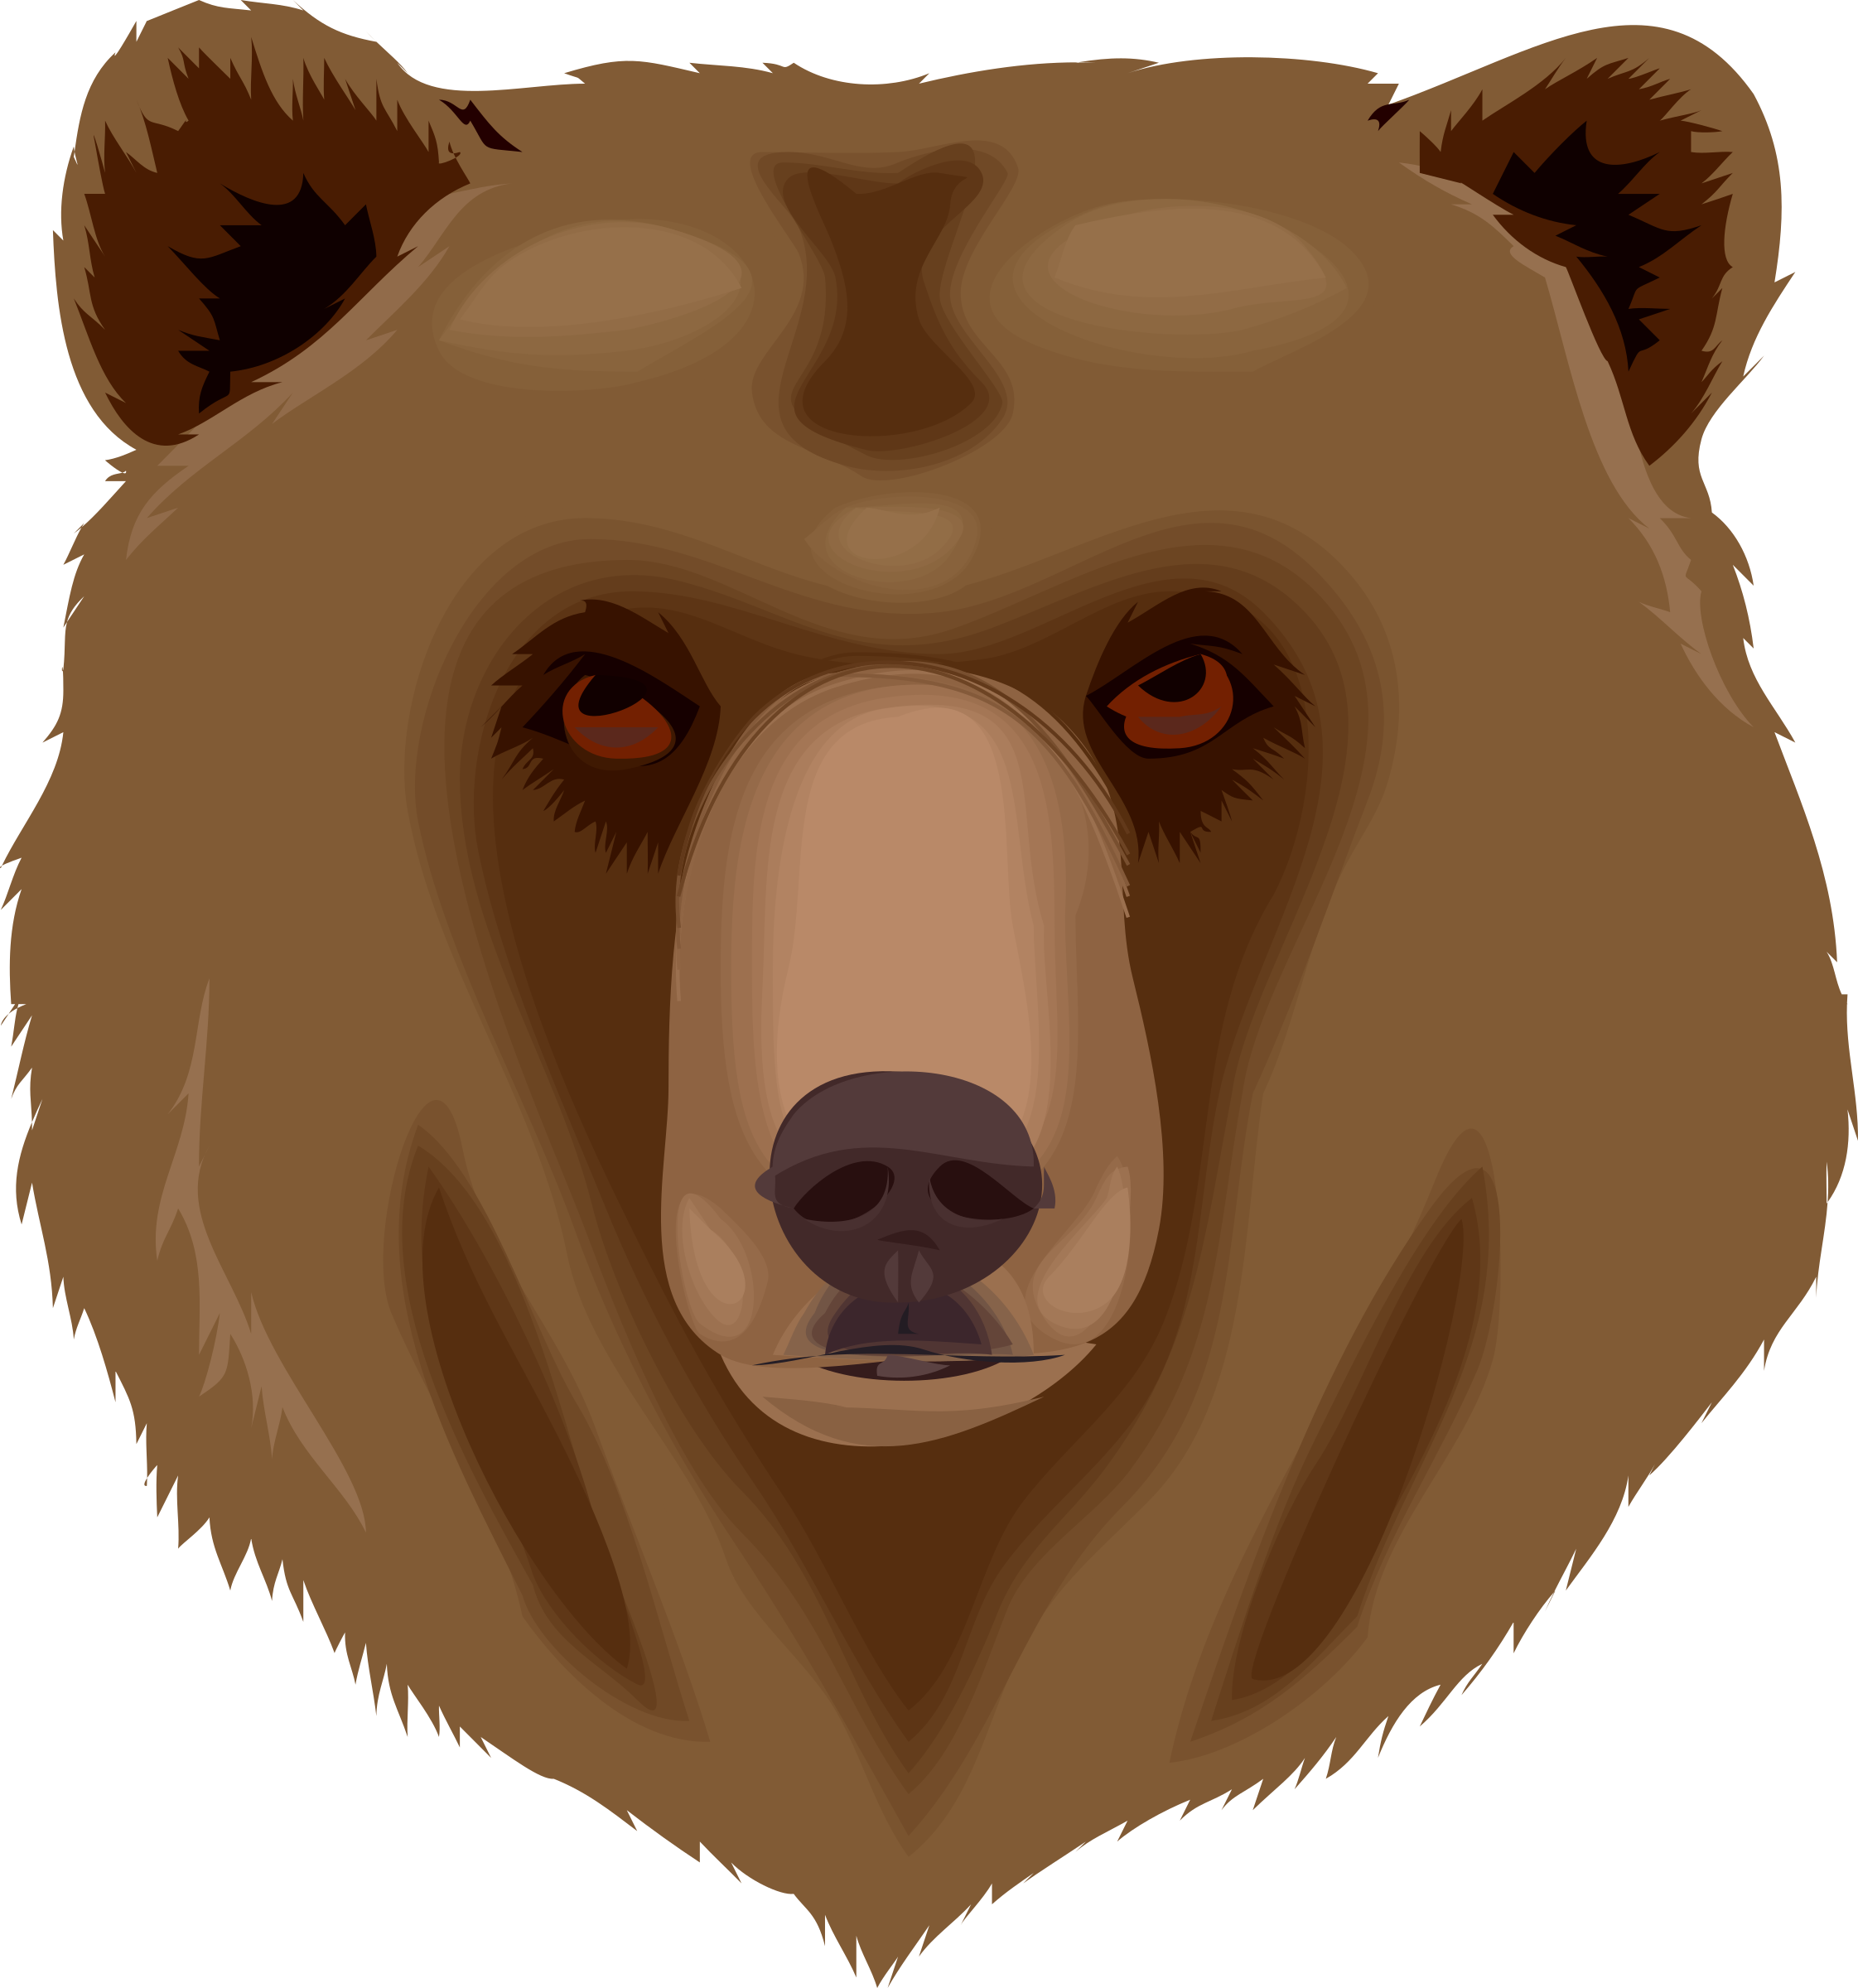 Free PNG Of Bears - 165172